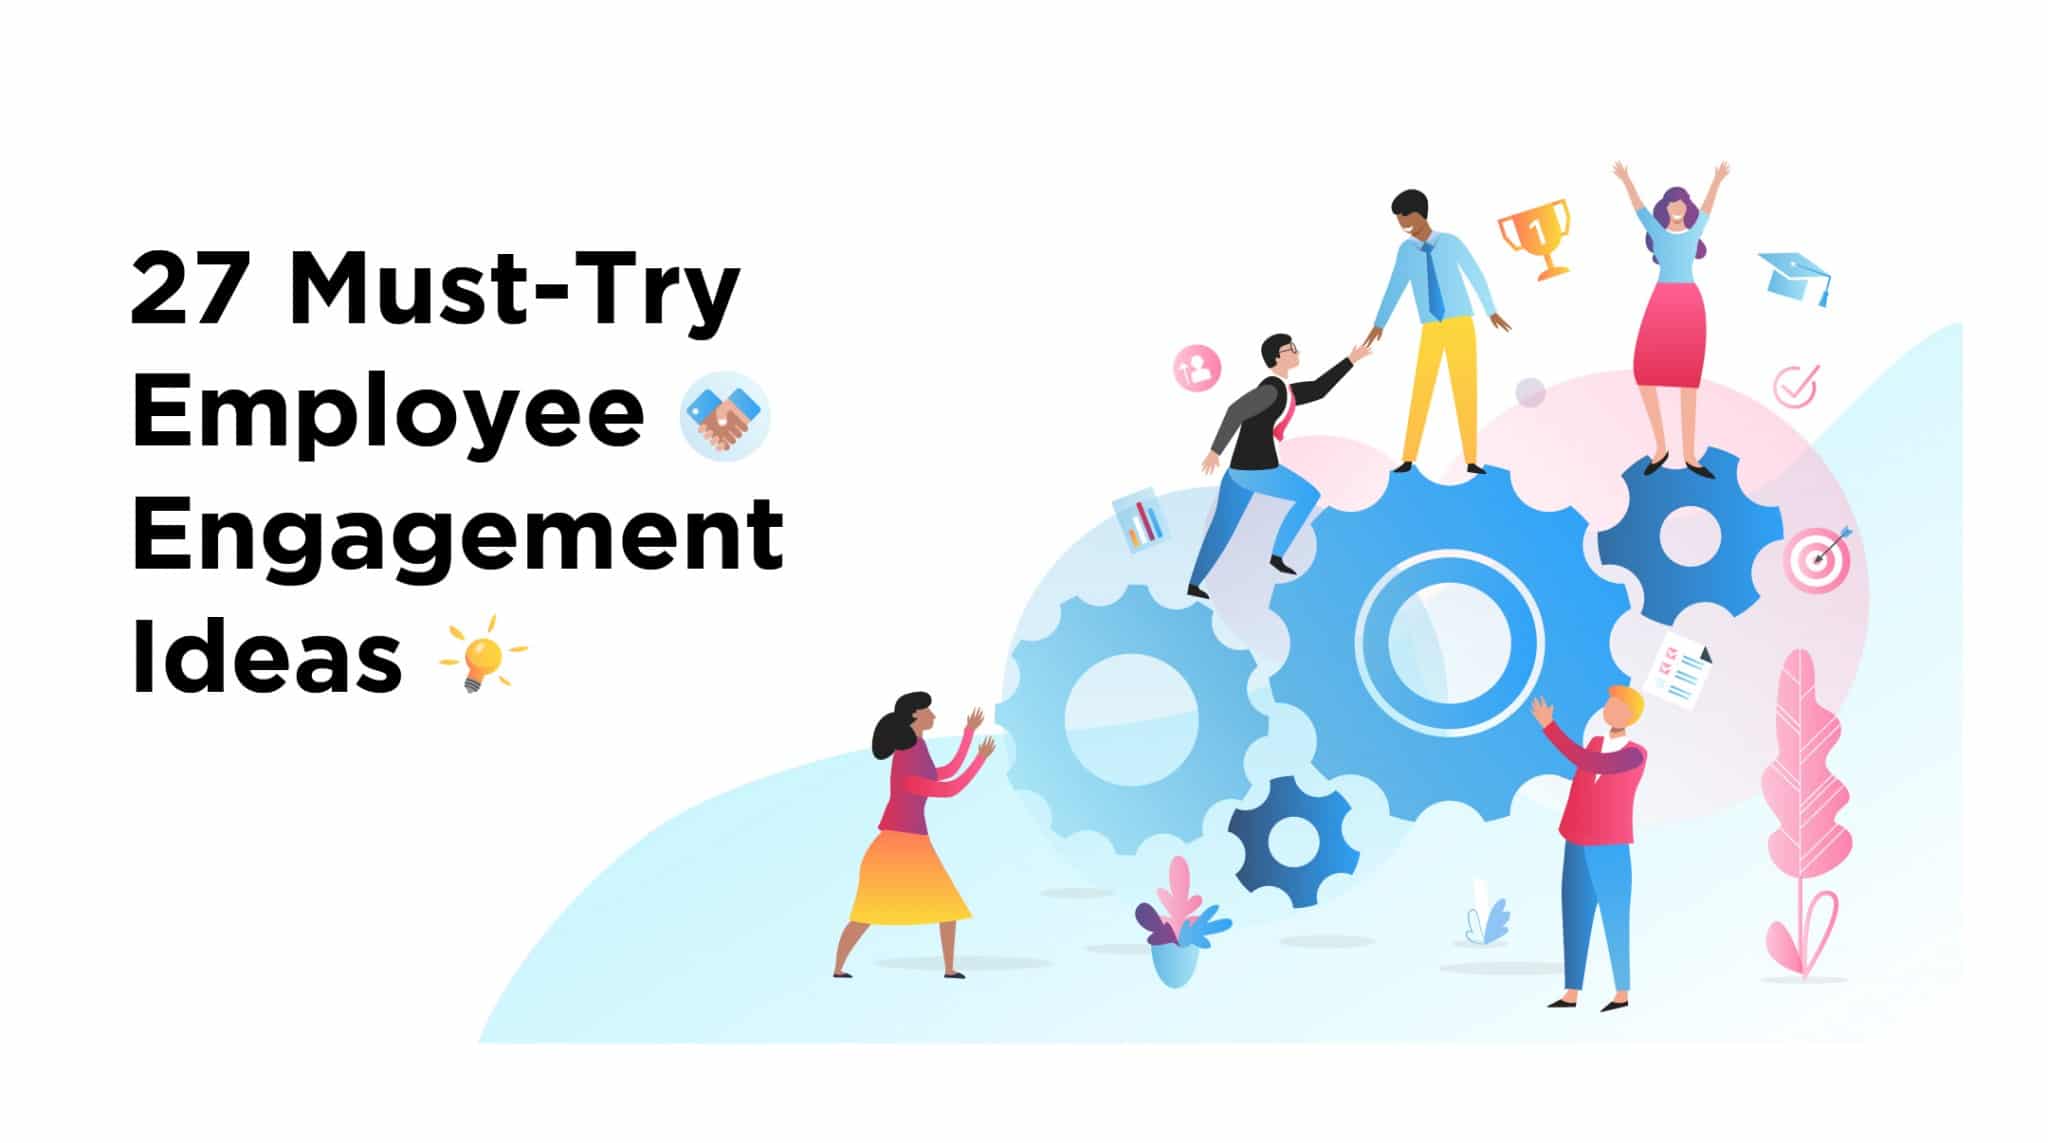 Employee Engagement Ideas: 27 Ways to Engage Employees in 2020